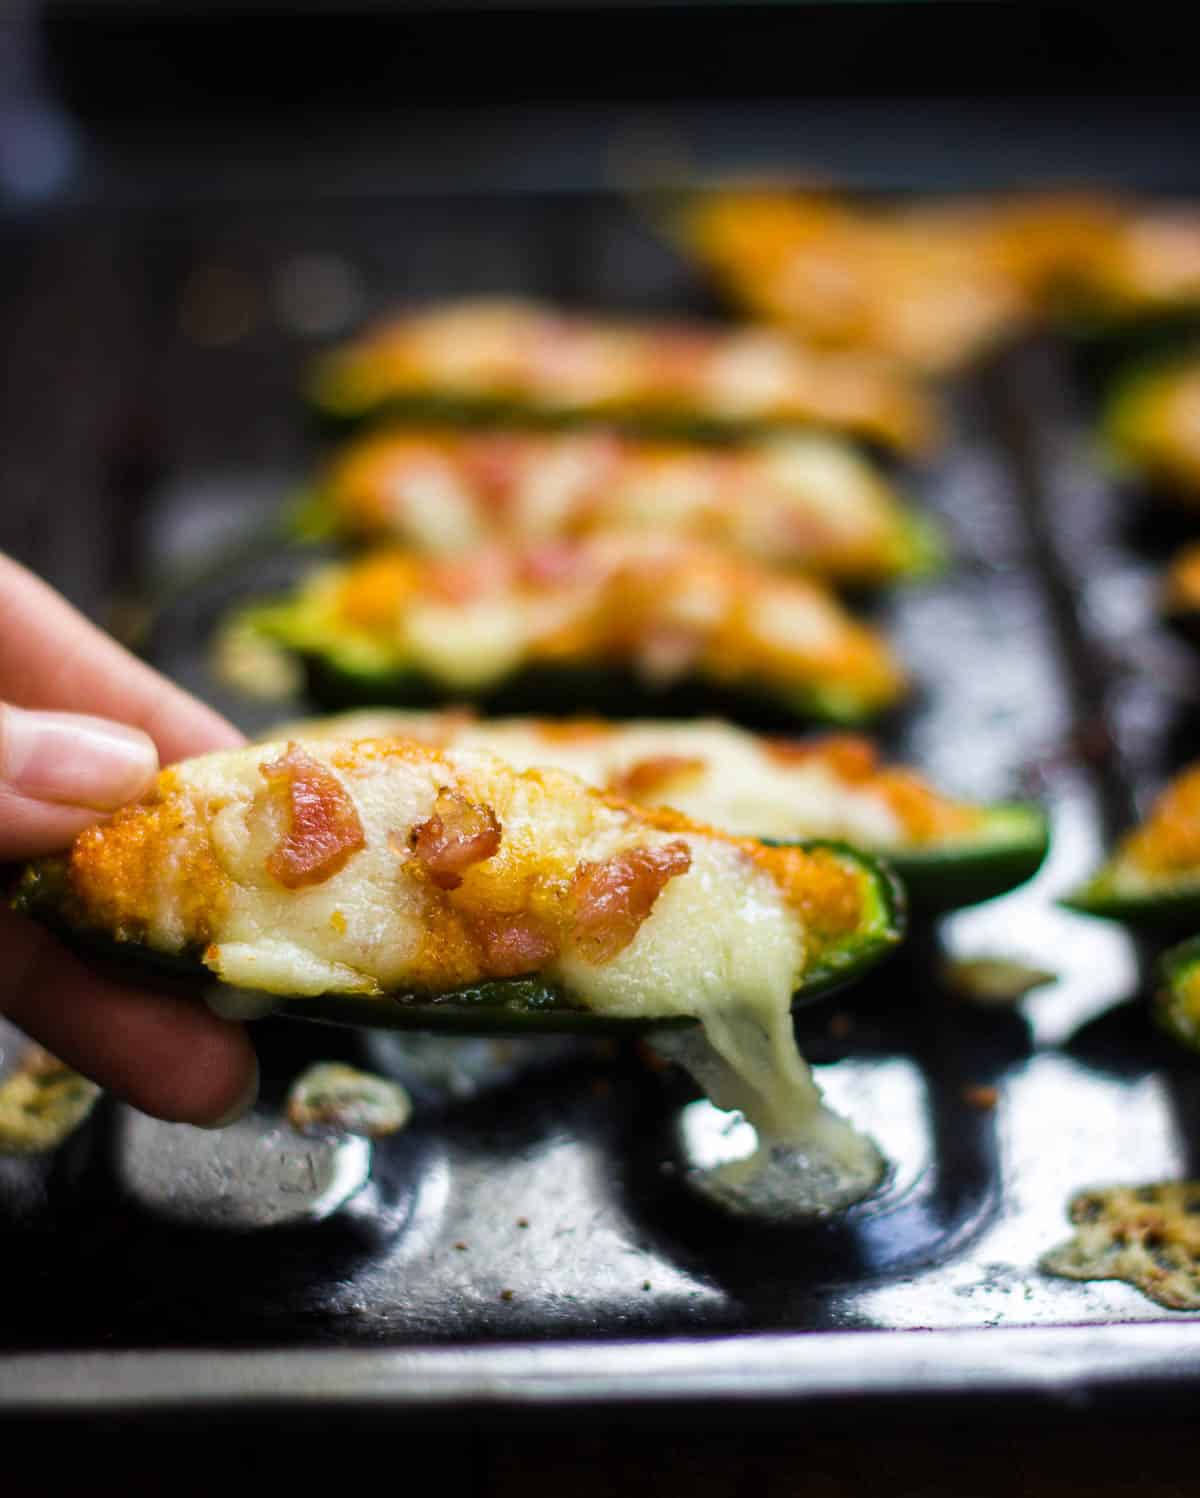 Baked jalapeno popper being picked up from the tray.